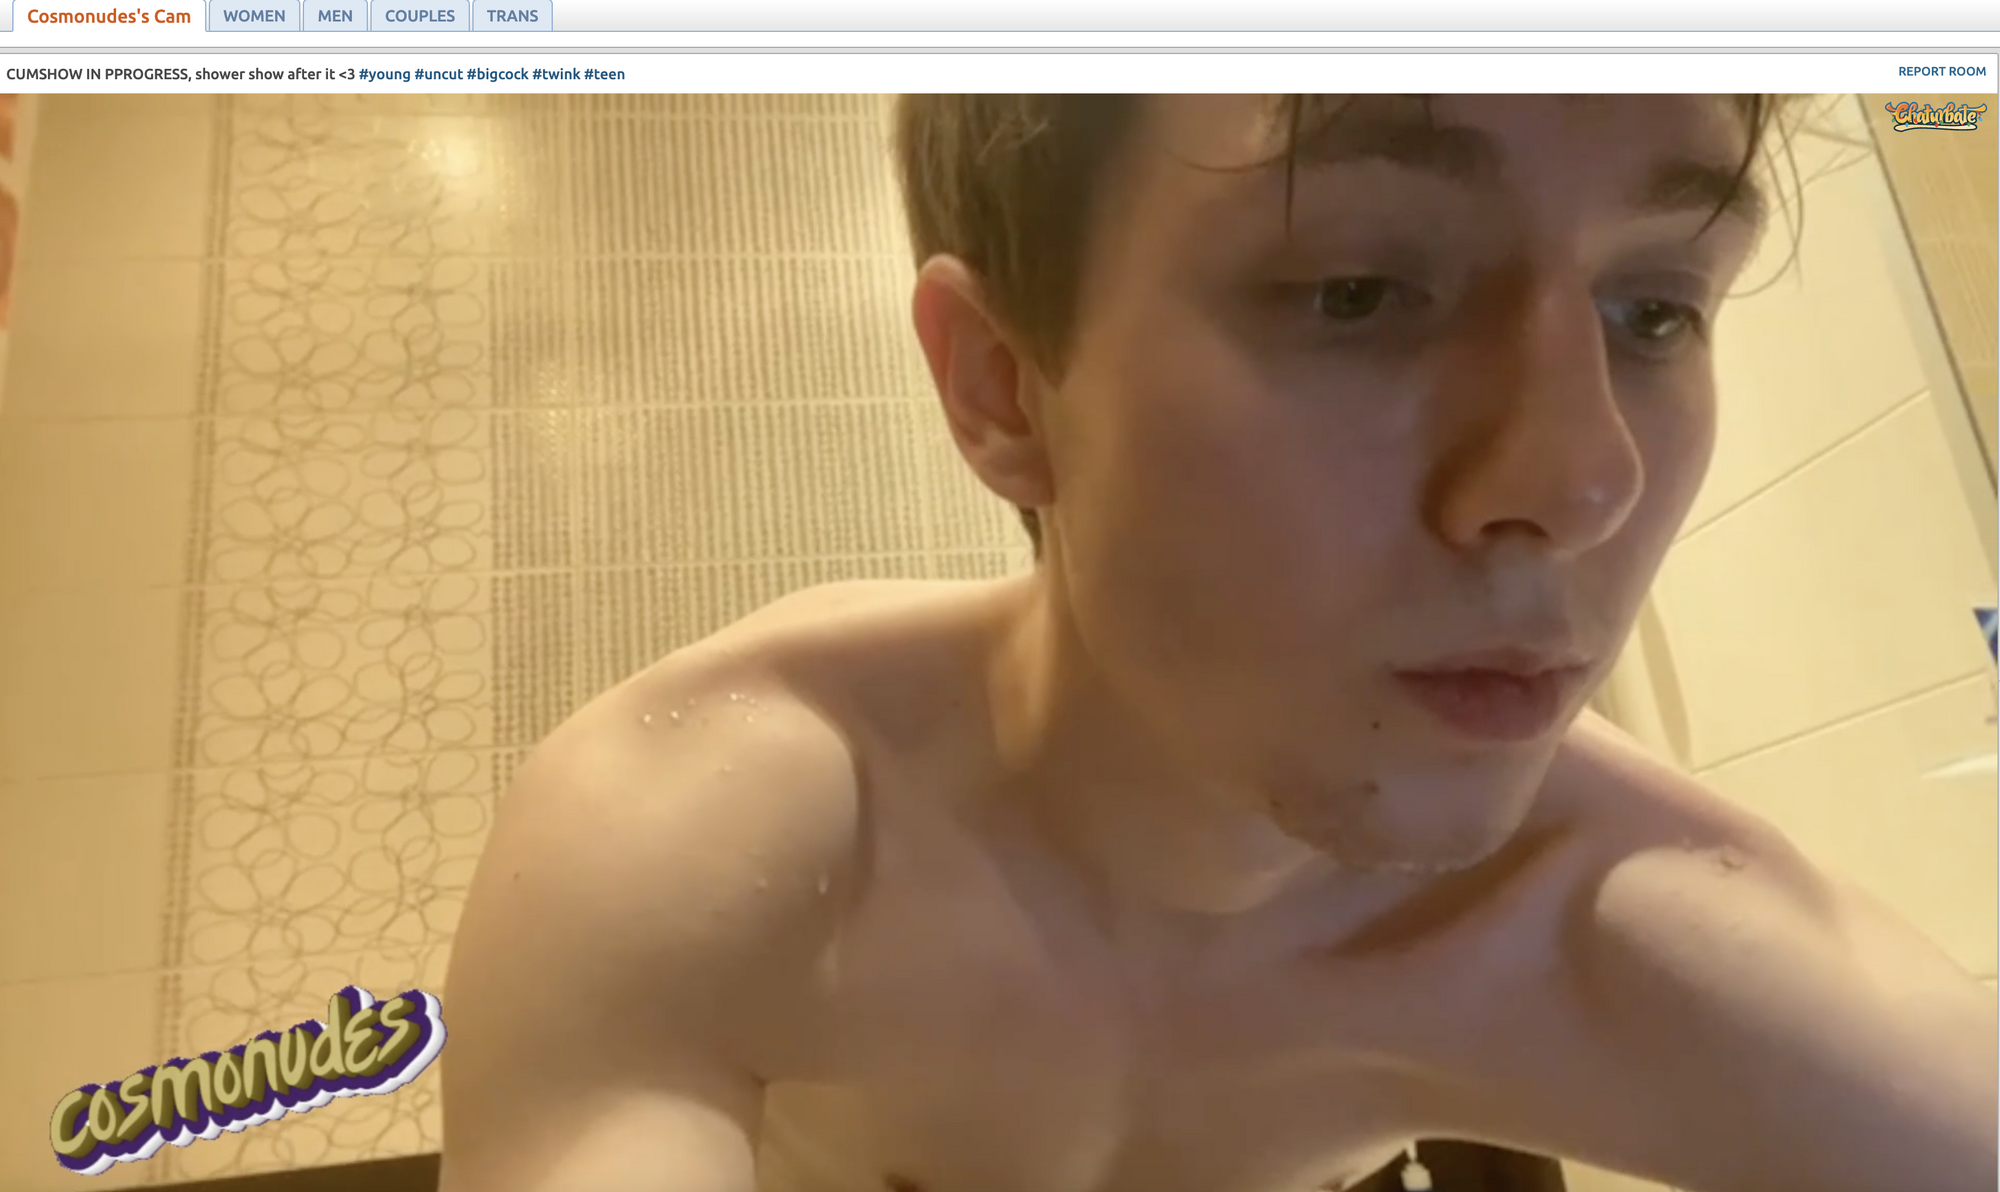 hot-guy-on-chaturbate.png